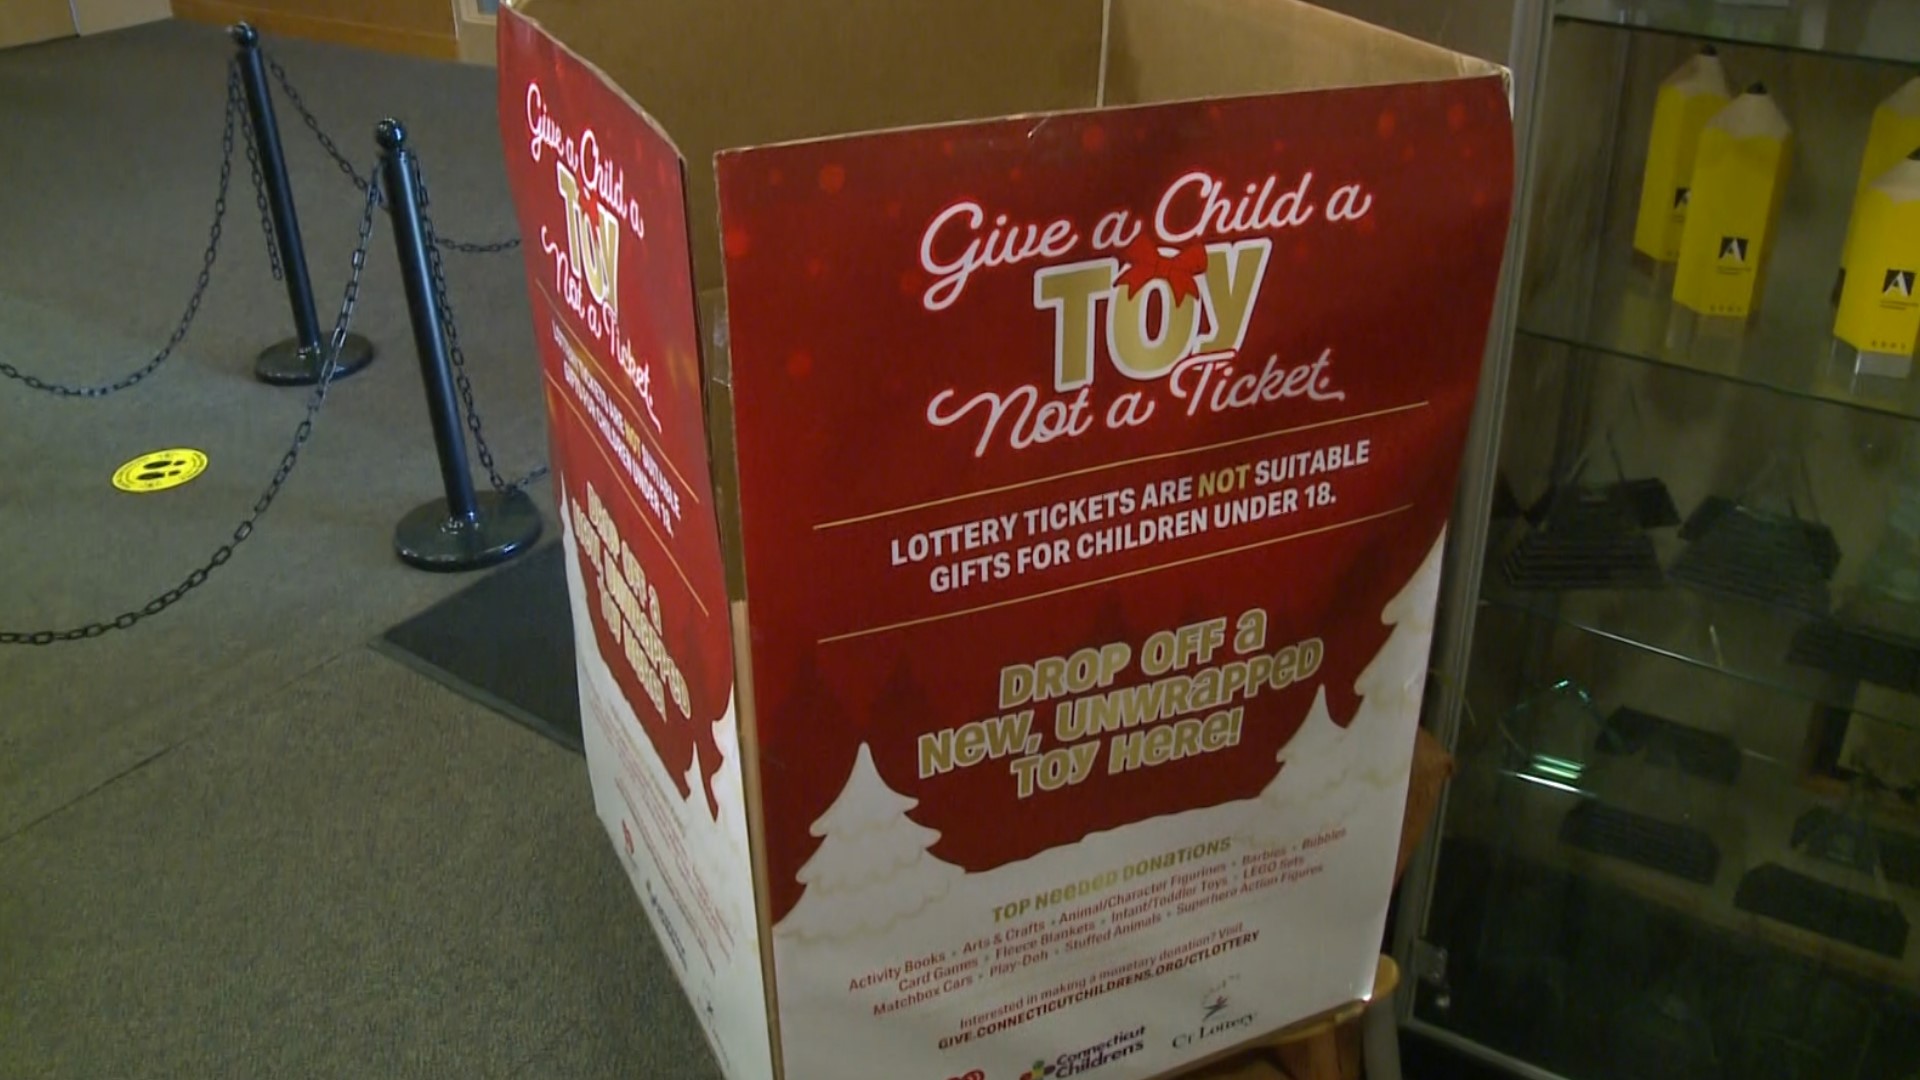 It's Giving Tuesday, and the CT Lottery is collecting toys for their "give a child a toy, not a ticket" campaign.